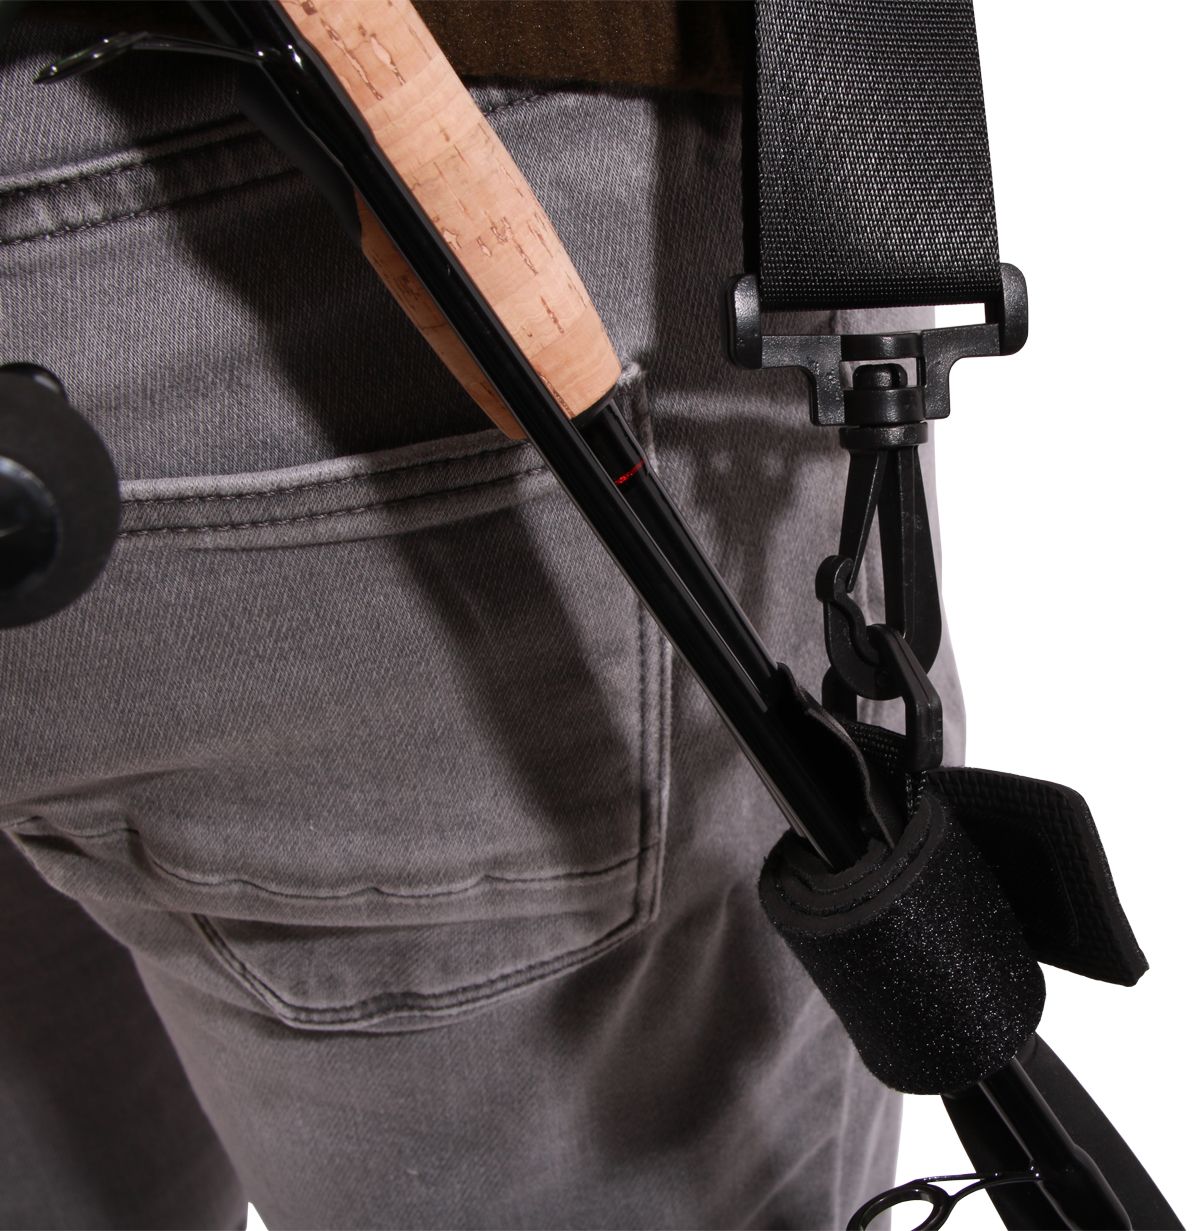 Porte-canne à pêche Attaché Sangles Outdoor Fishing Rod Carry Straps Tackle  Holder